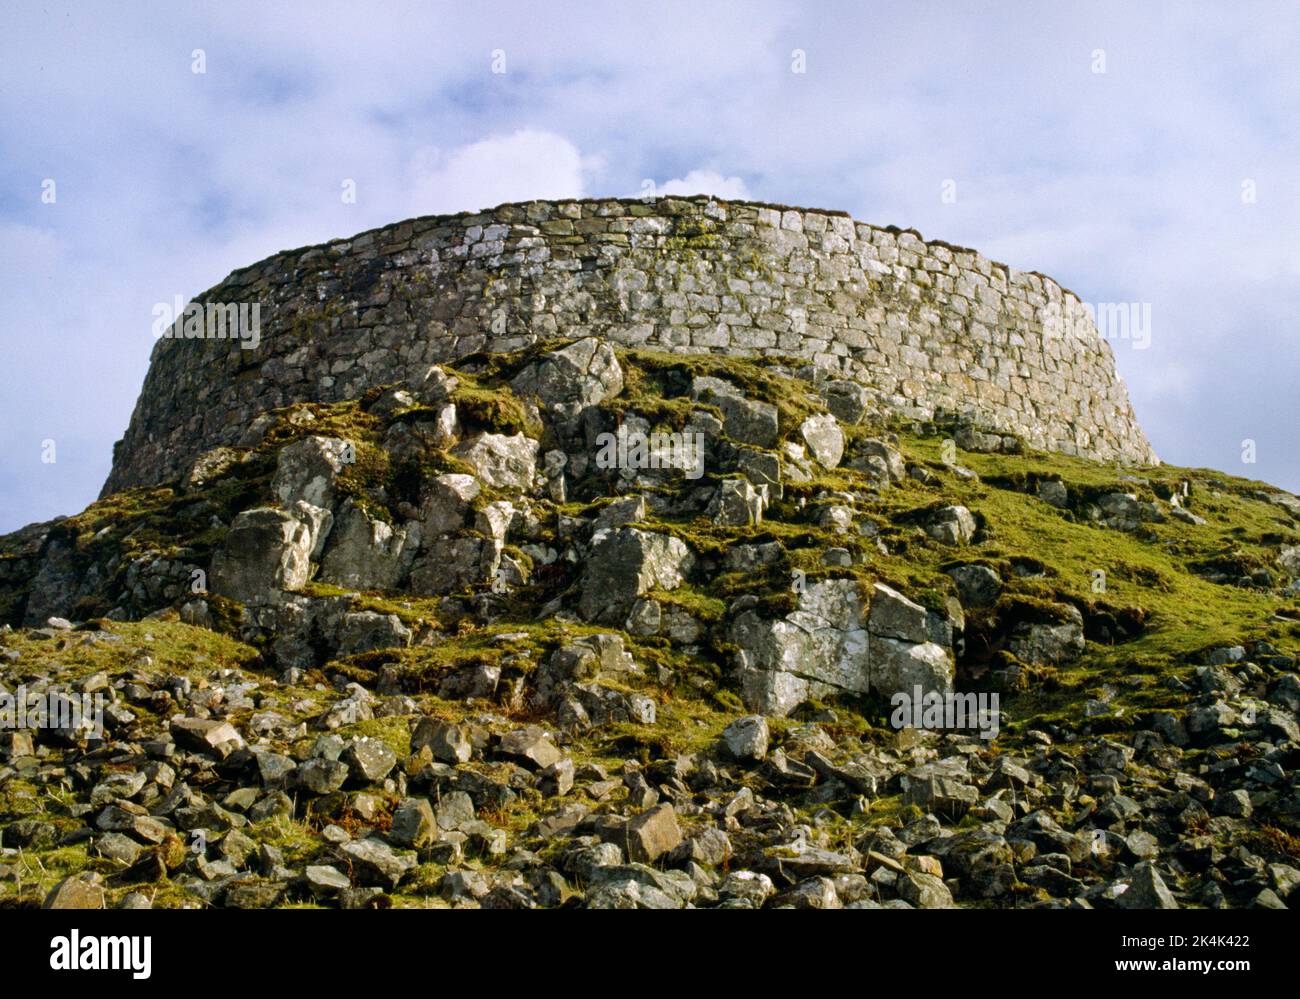 Dun Beag Broch, Struan, Isle of Skye, Scotland. the northern section of outer wall of Iron Age defensive round tower built on a rocky knoll. Stock Photo